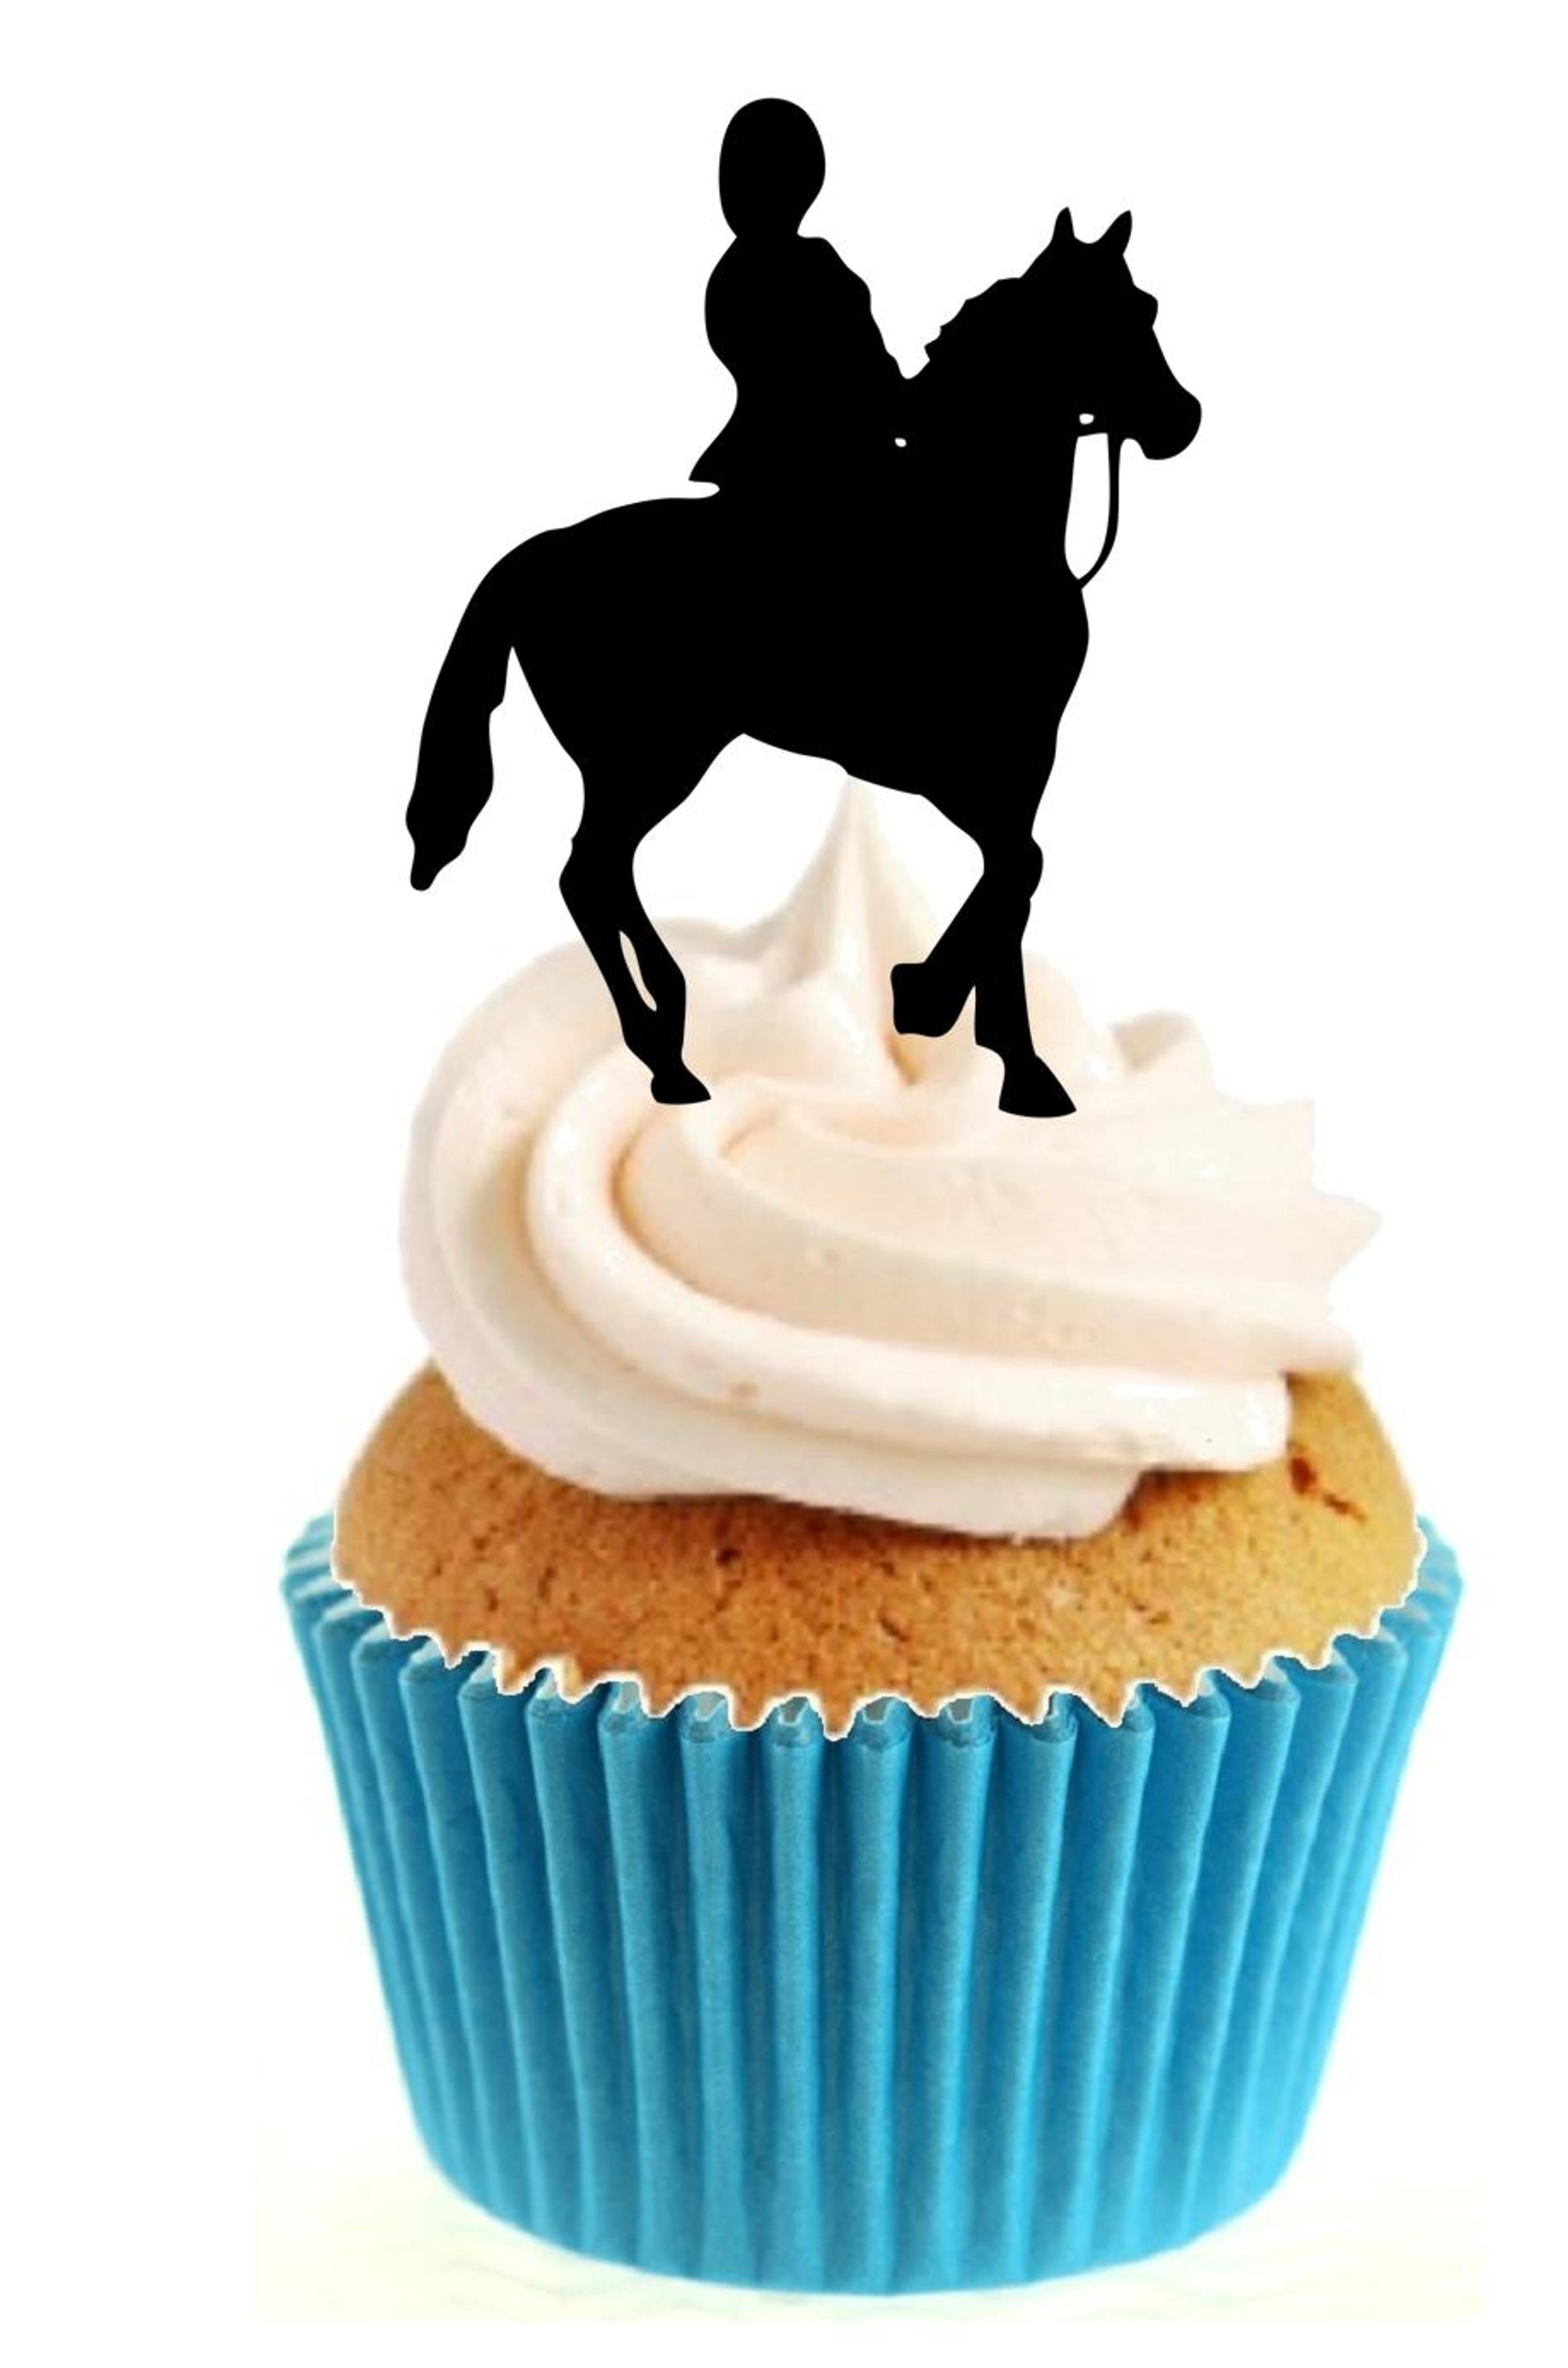 Horse Riding - Animal Figurines - Special Cakes